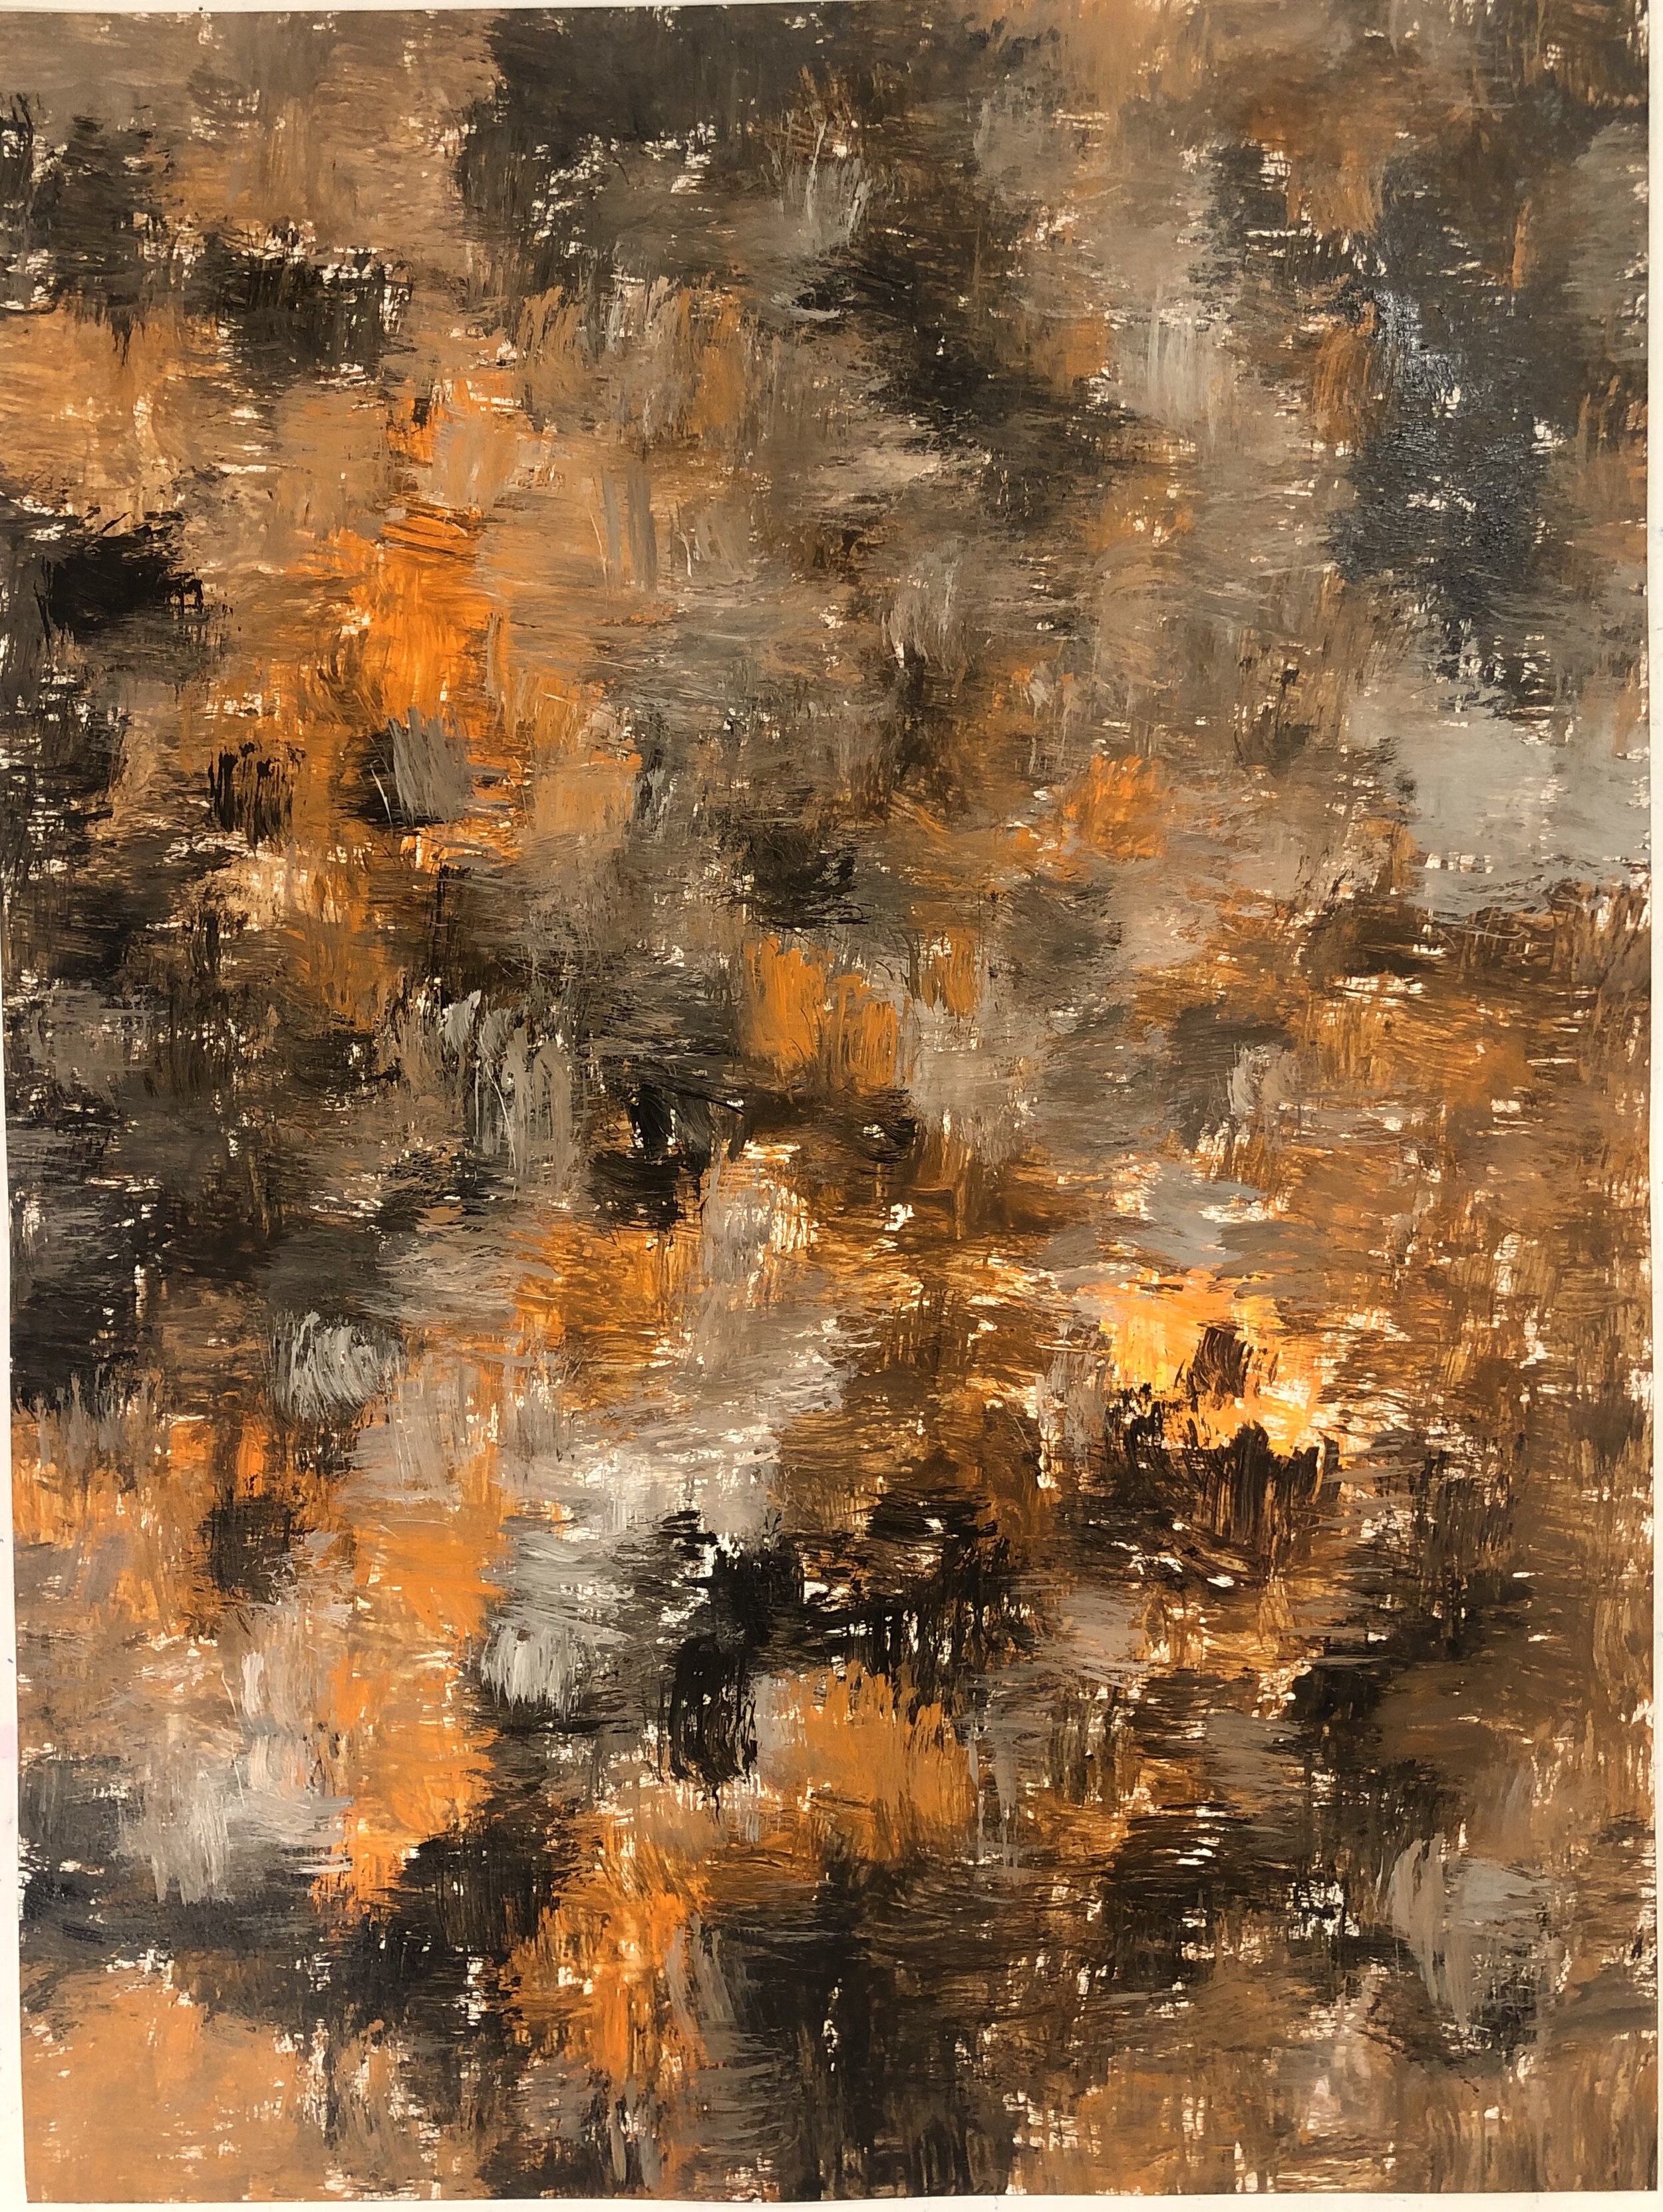 markperryart-abstract-paintings-rust-brown-gold-markmaking-allover-painting-24x18.jpg